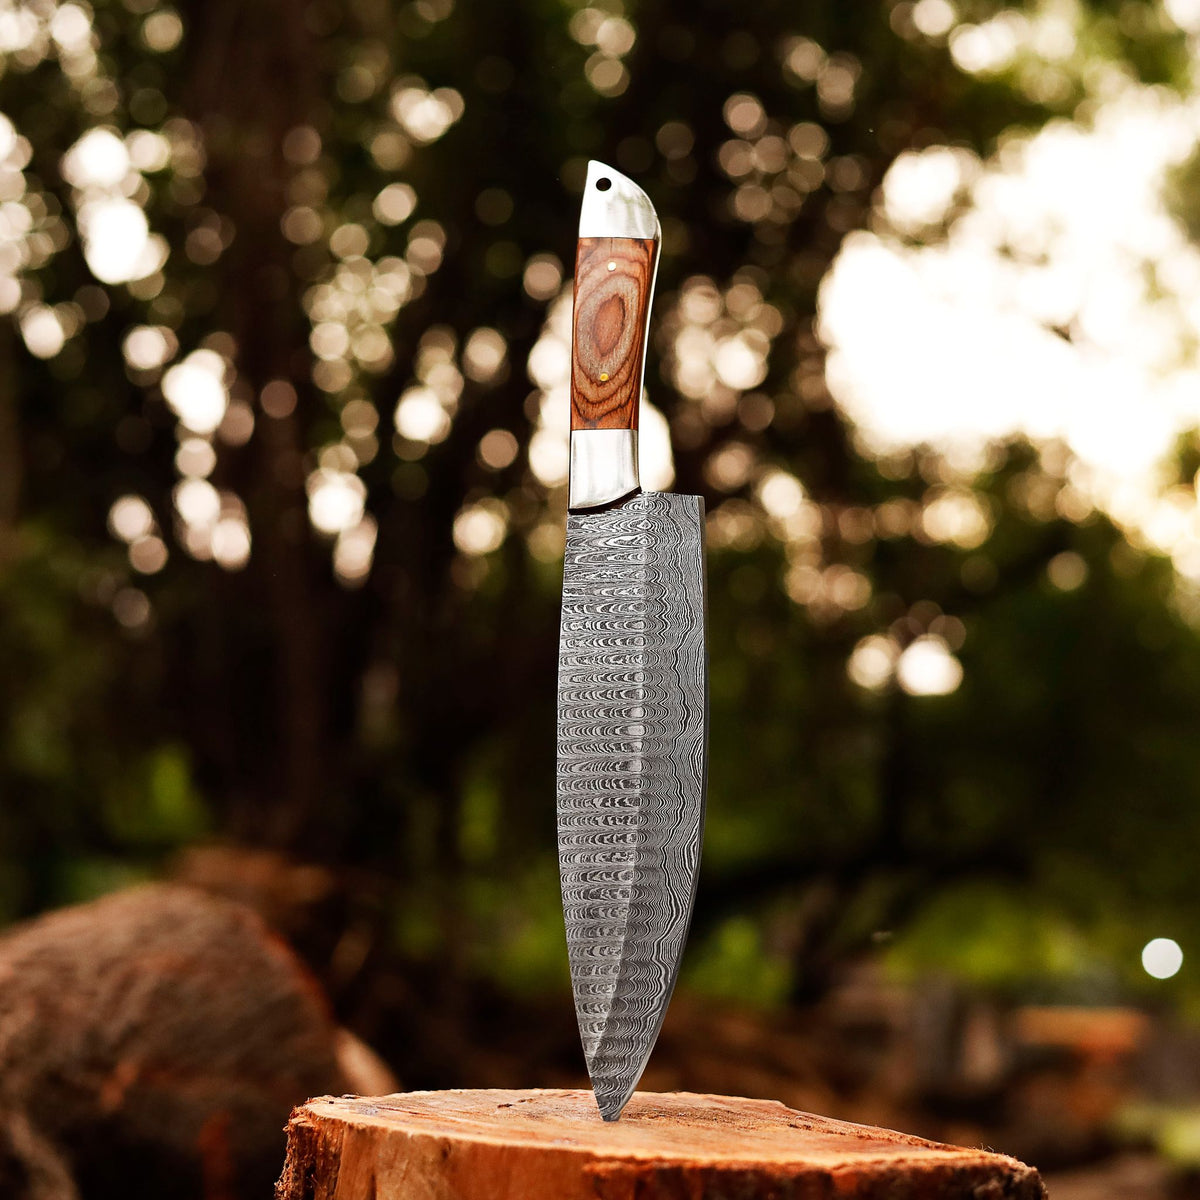 Blade Smith - The Damascus Steel Ladder pattern Chef knife